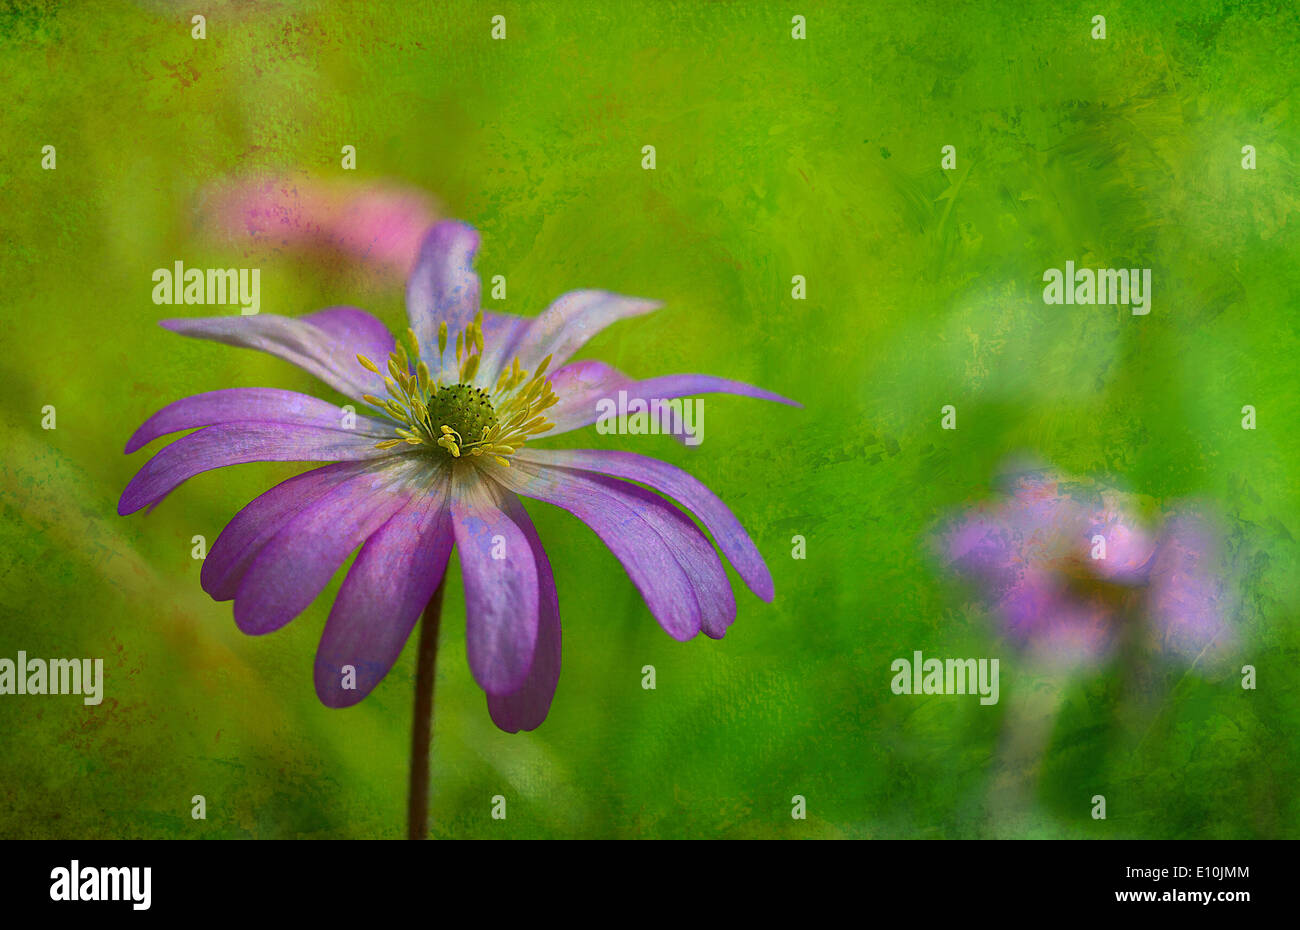 Anemone blanda with added textures. Stock Photo